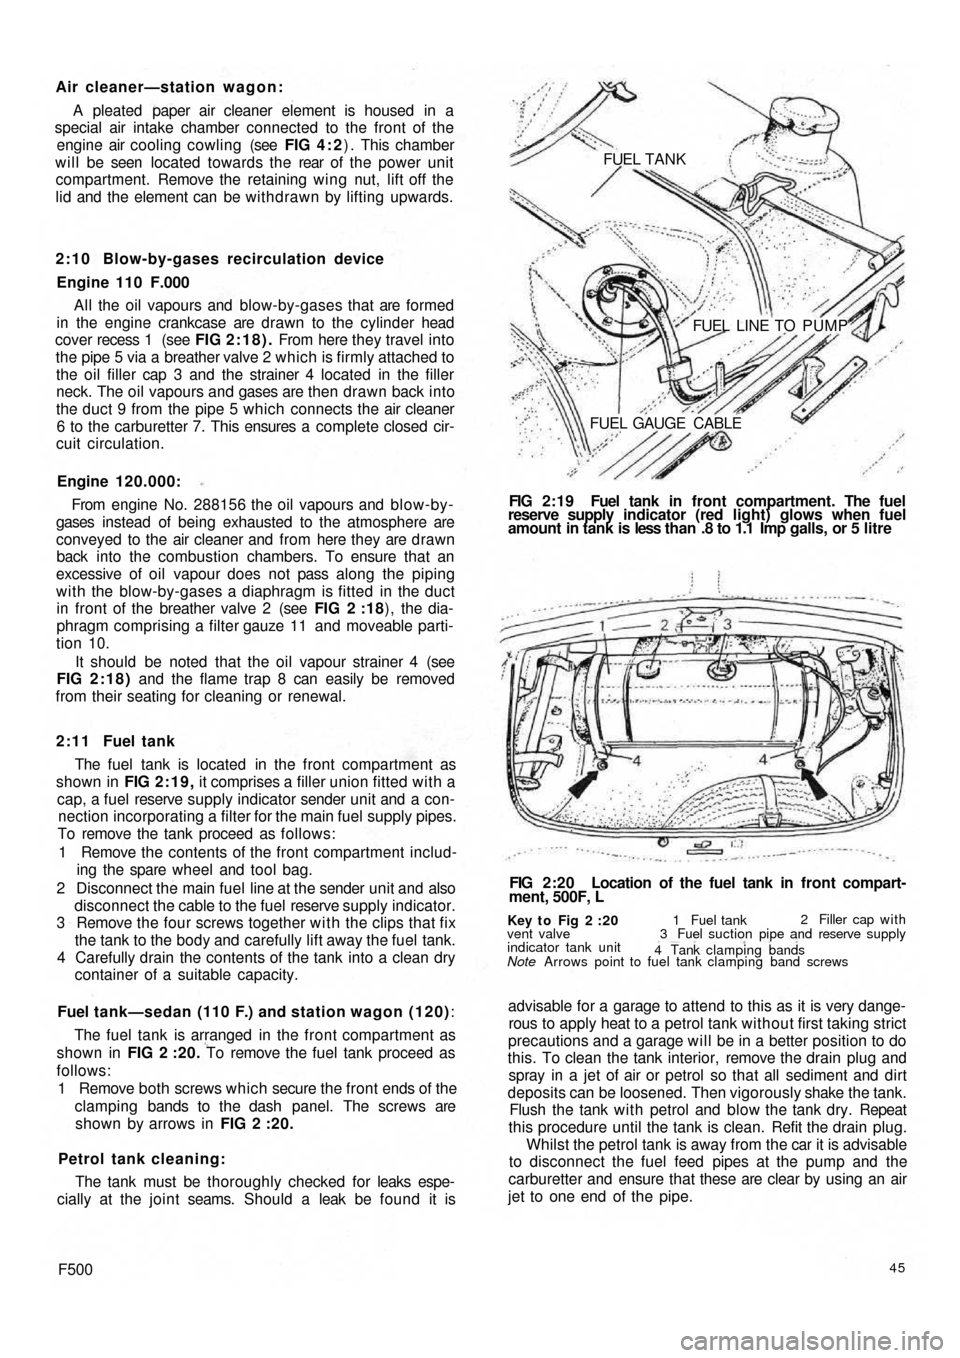 FIAT 500 1957 1.G Workshop Manual Air cleaner—station wagon:
A pleated paper air cleaner element is housed  in a
special air intake chamber connected to the front of the
engine air cooling cowling (see FIG 4 : 2) . This chamber
will